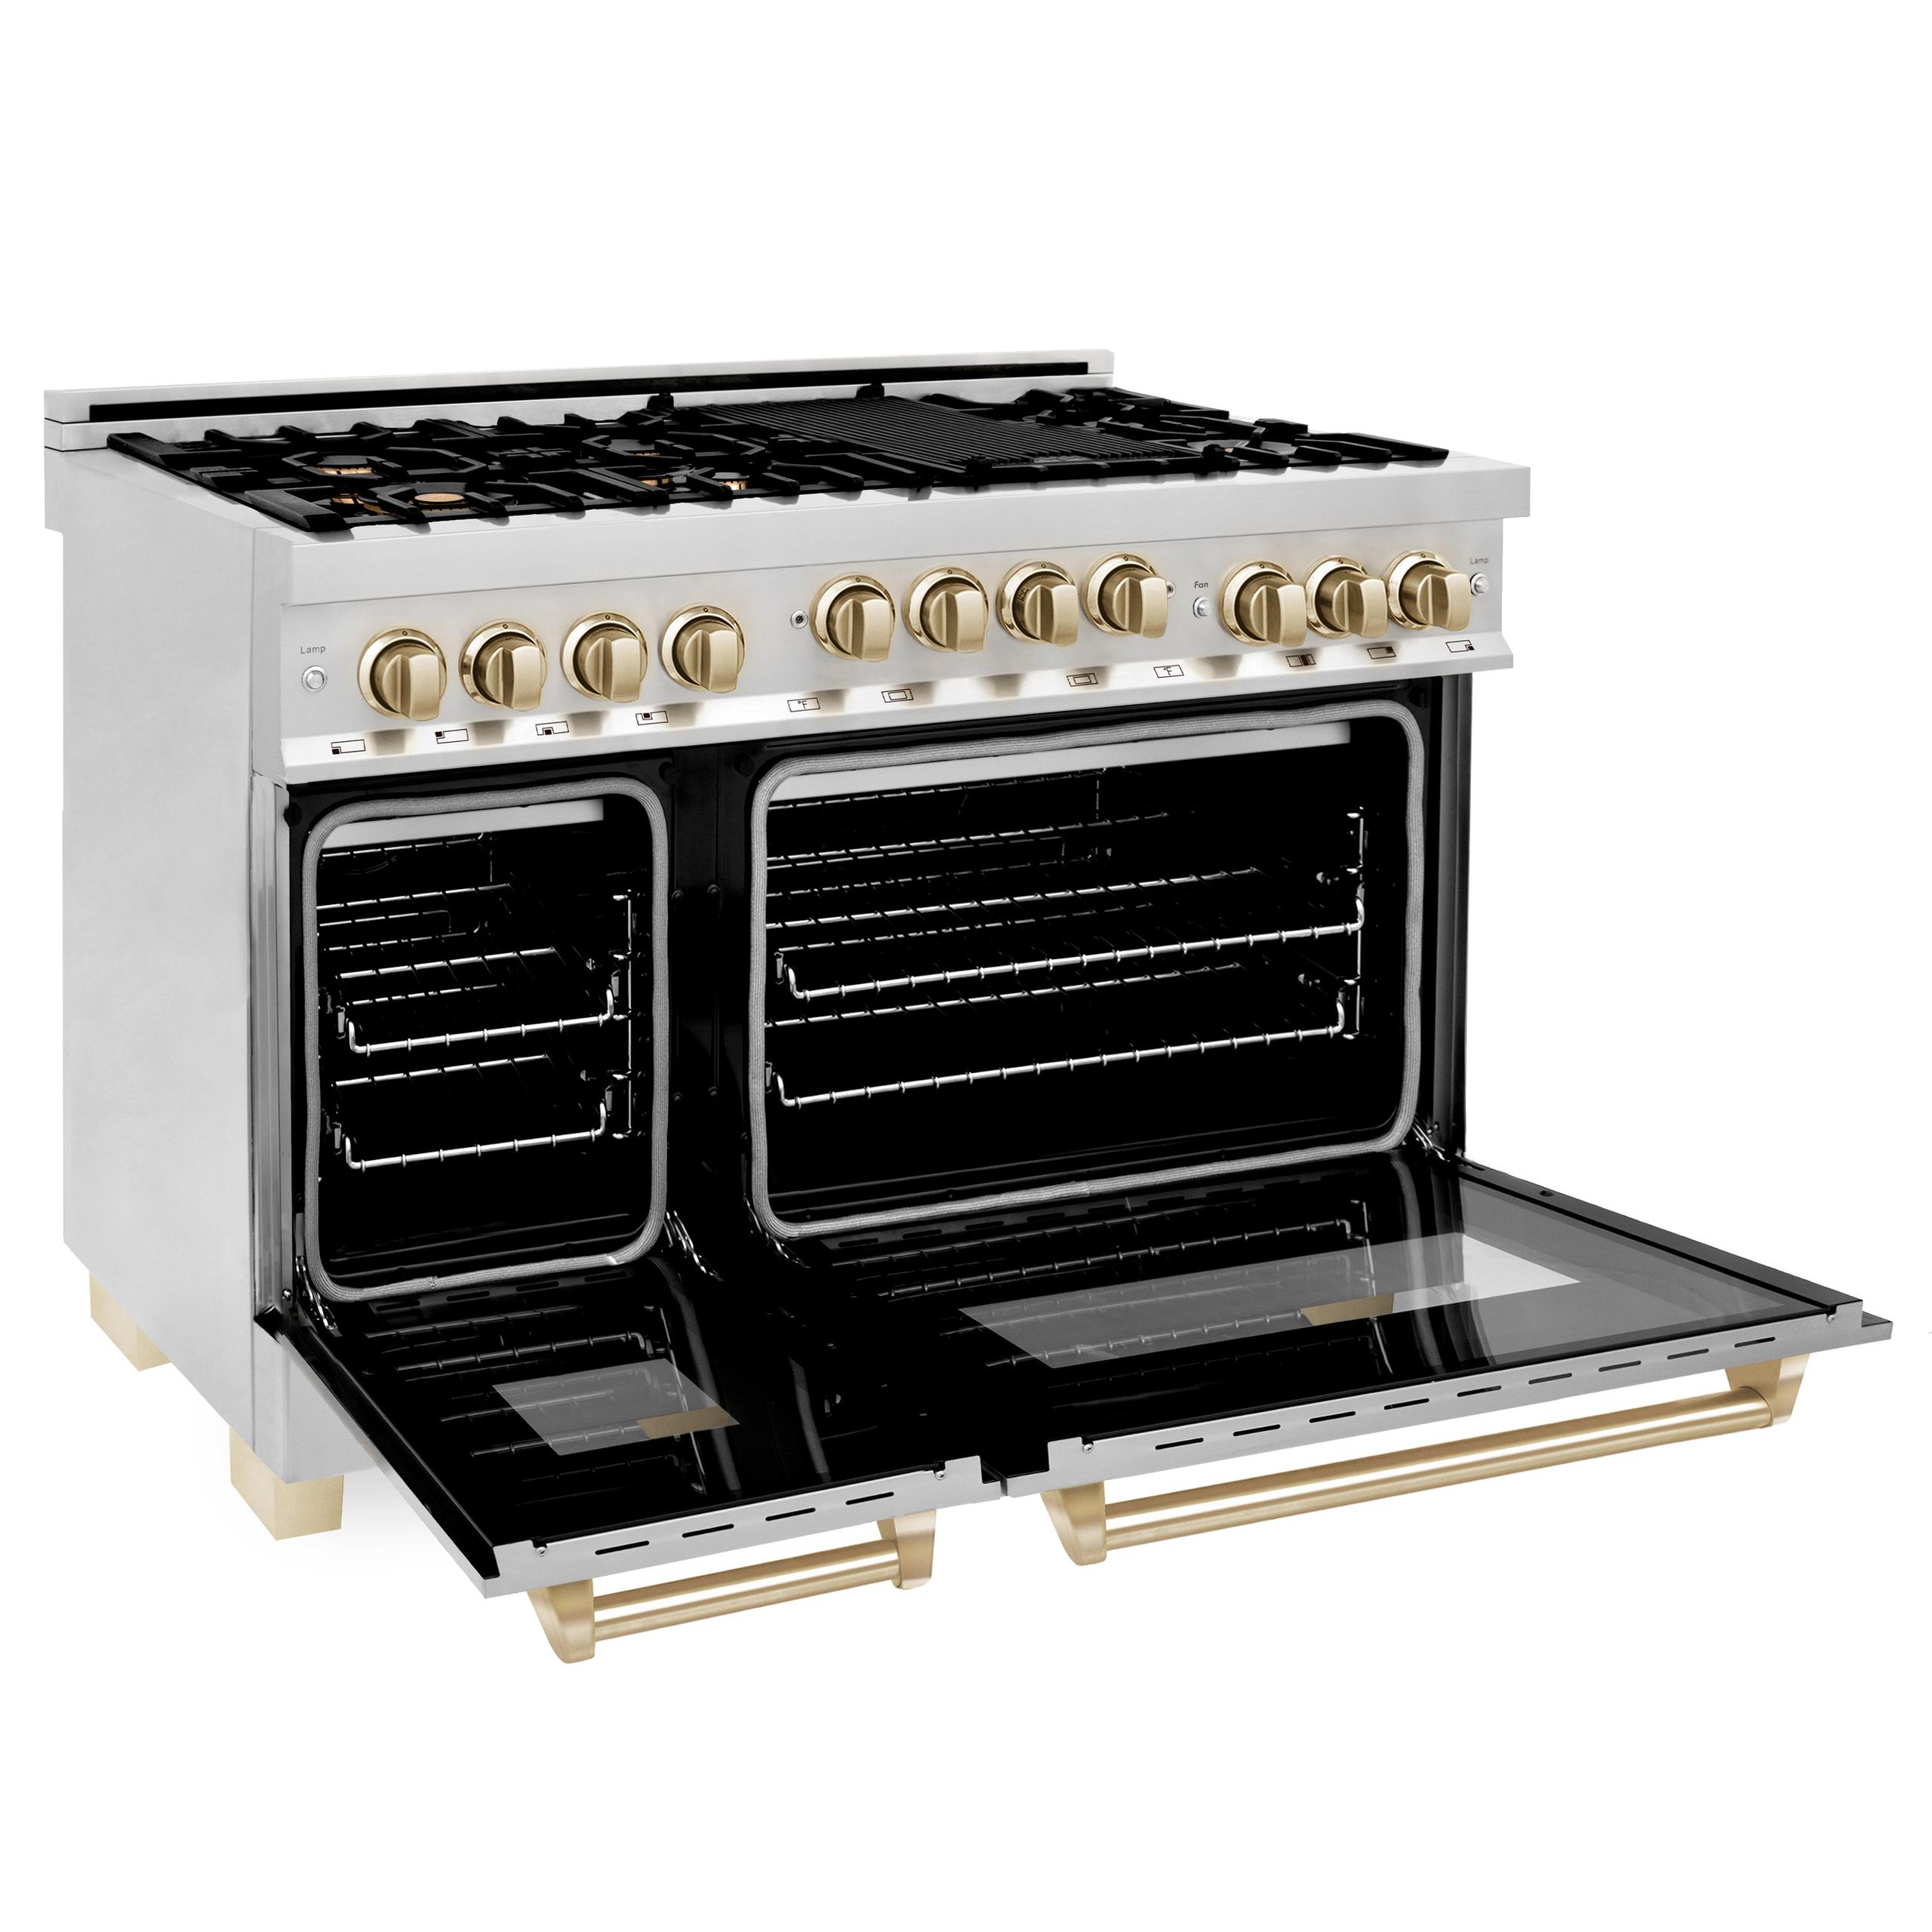 ZLINE KITCHEN AND BATH RGZ48G ZLINE Autograph Edition 48" 6.0 cu. ft. Range with Gas Stove and Gas Oven in Stainless Steel with Accents Color: Gold